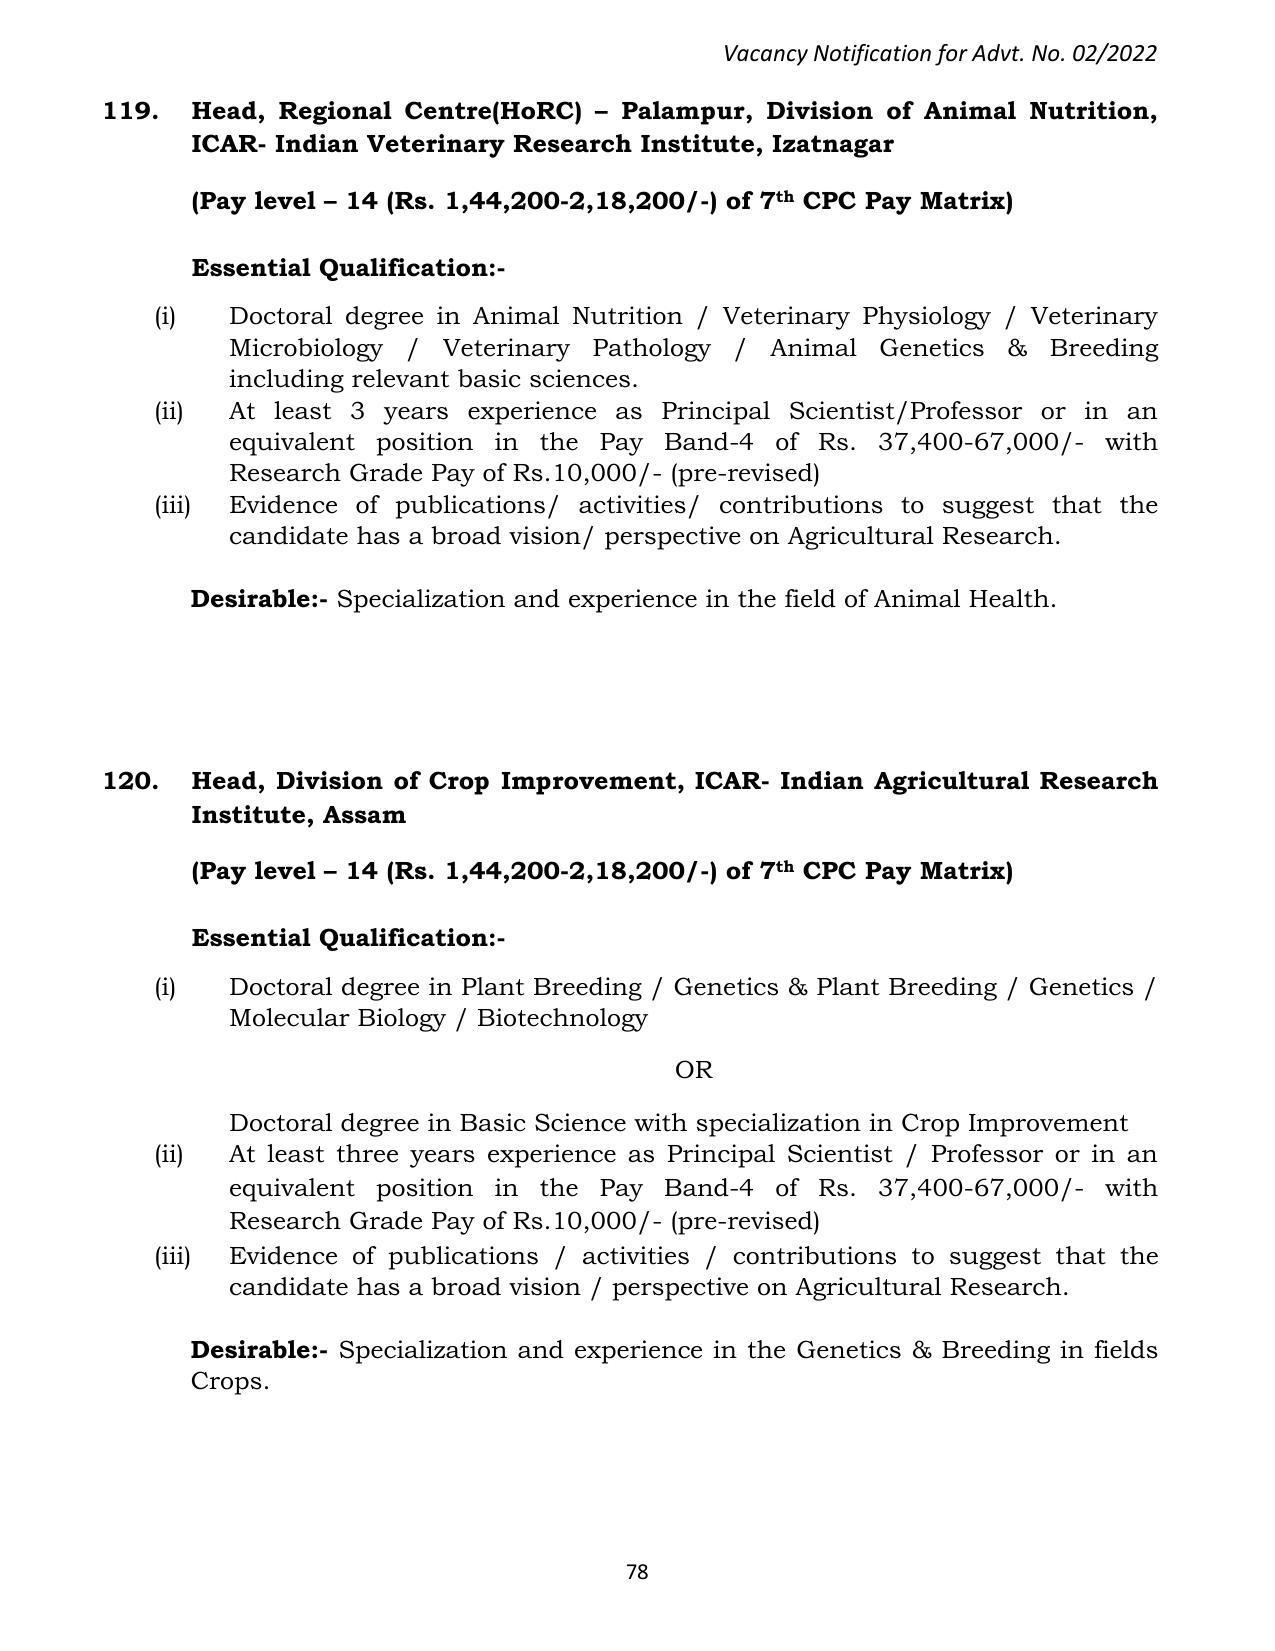 ASRB Non-Research Management Recruitment 2022 - Page 194